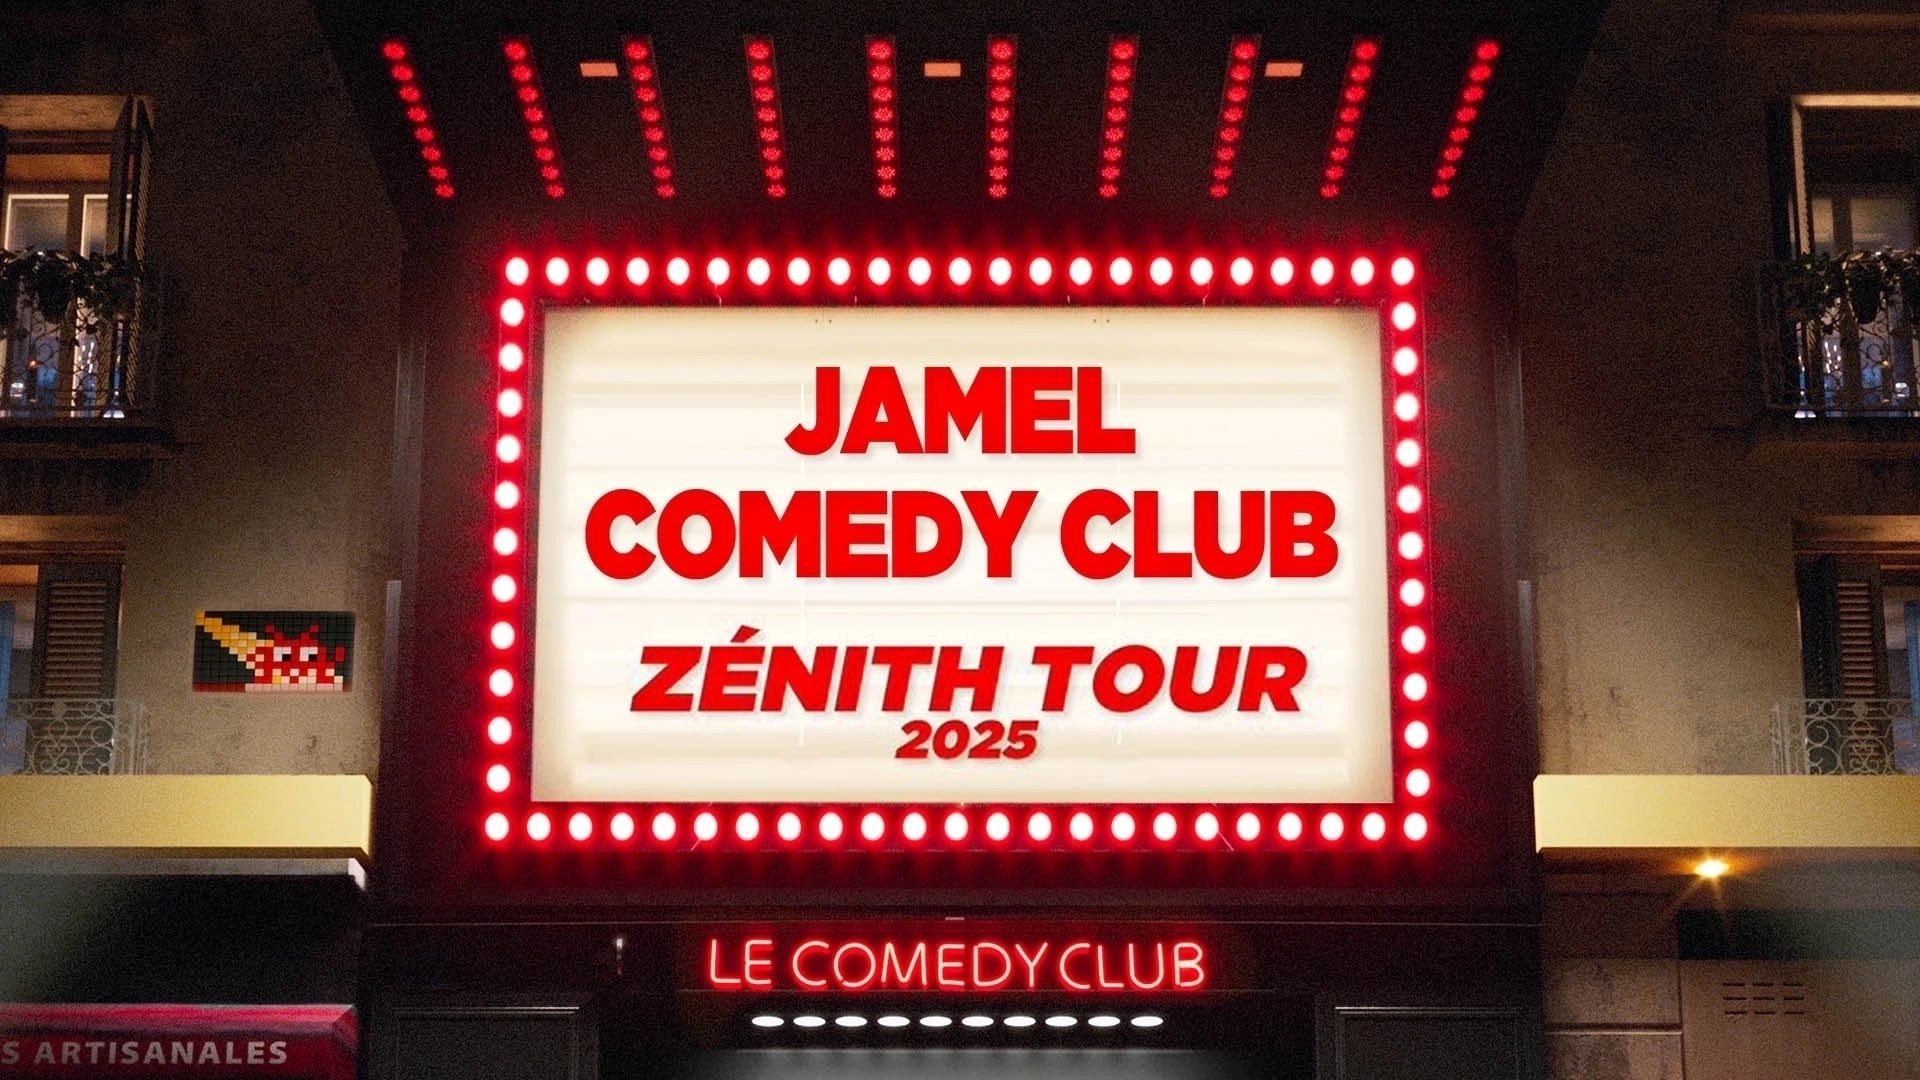 Jamel Comedy Club Zenith Tour 2025 at Forest National Tickets